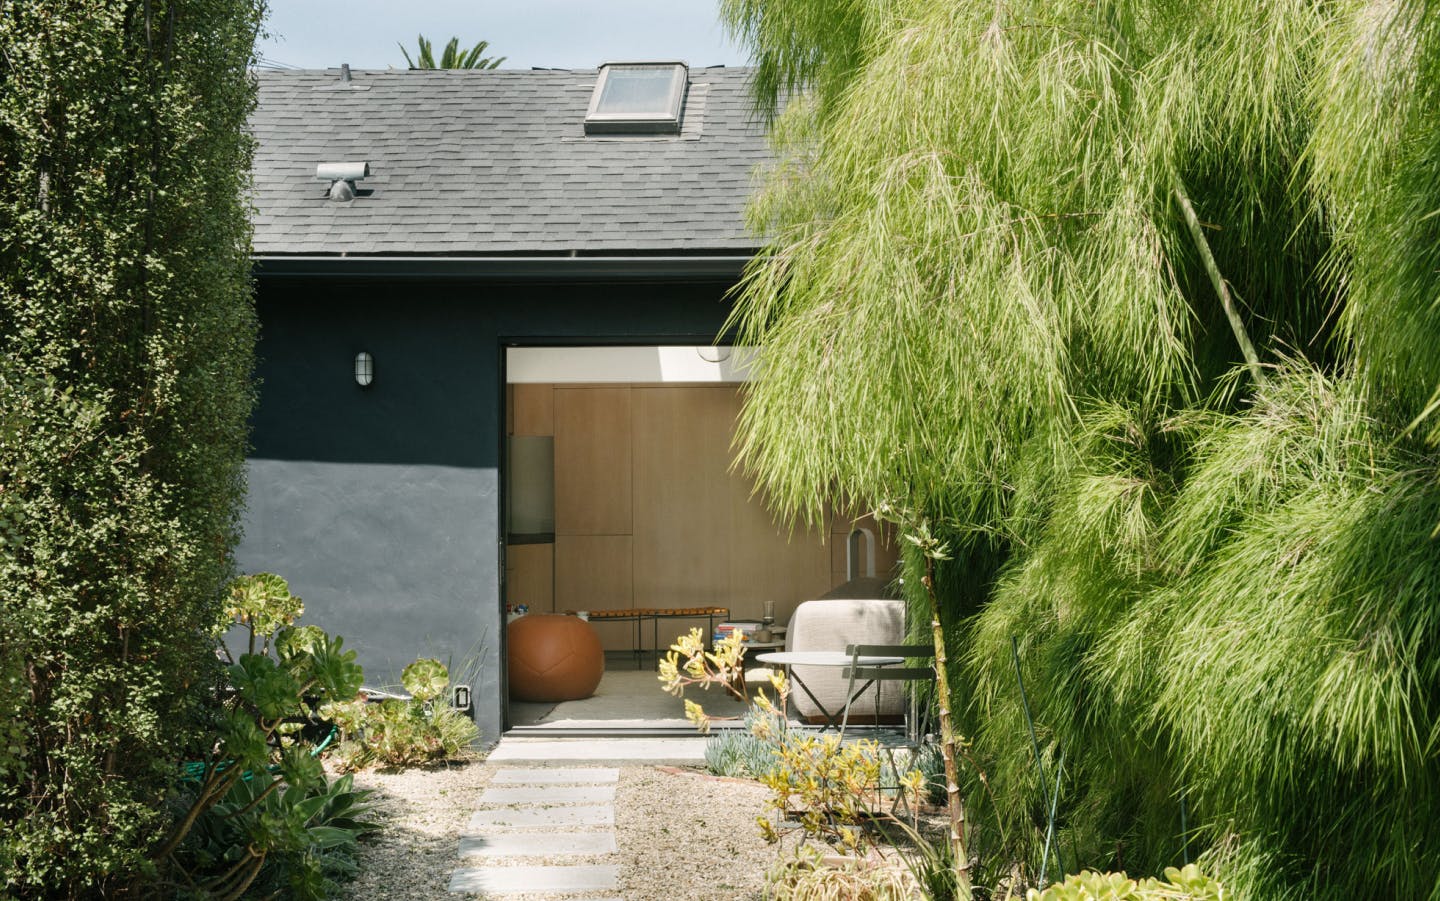 The outside of a bungalow in Venice Beach. There are trees in the foreground and a black bungalow with a large garage door open. Inside you can see two stools and a leather beanbag chair. In the foreground there's also a little bistro table set